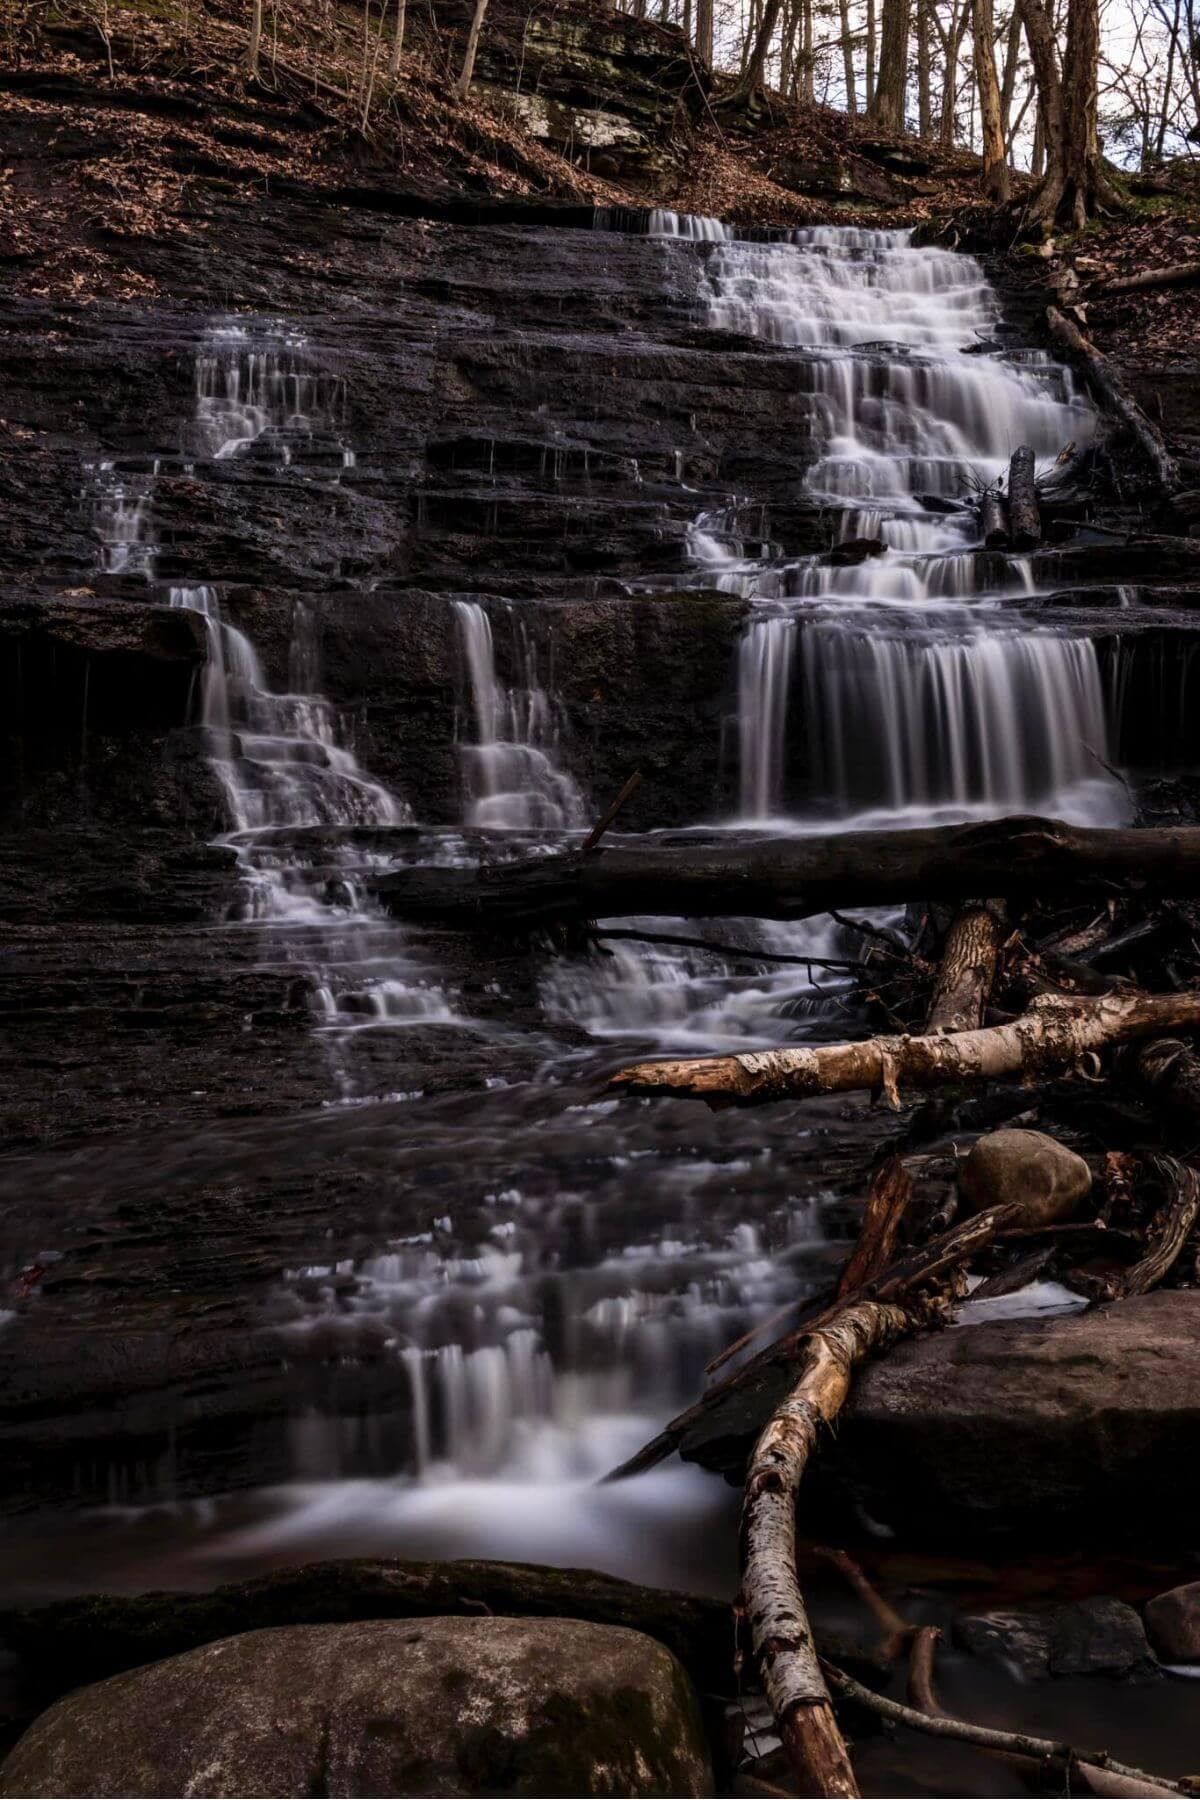 A cascading waterfall flows over rock ledges in a Connecticut forest, with fallen logs scattered across the water at its base.